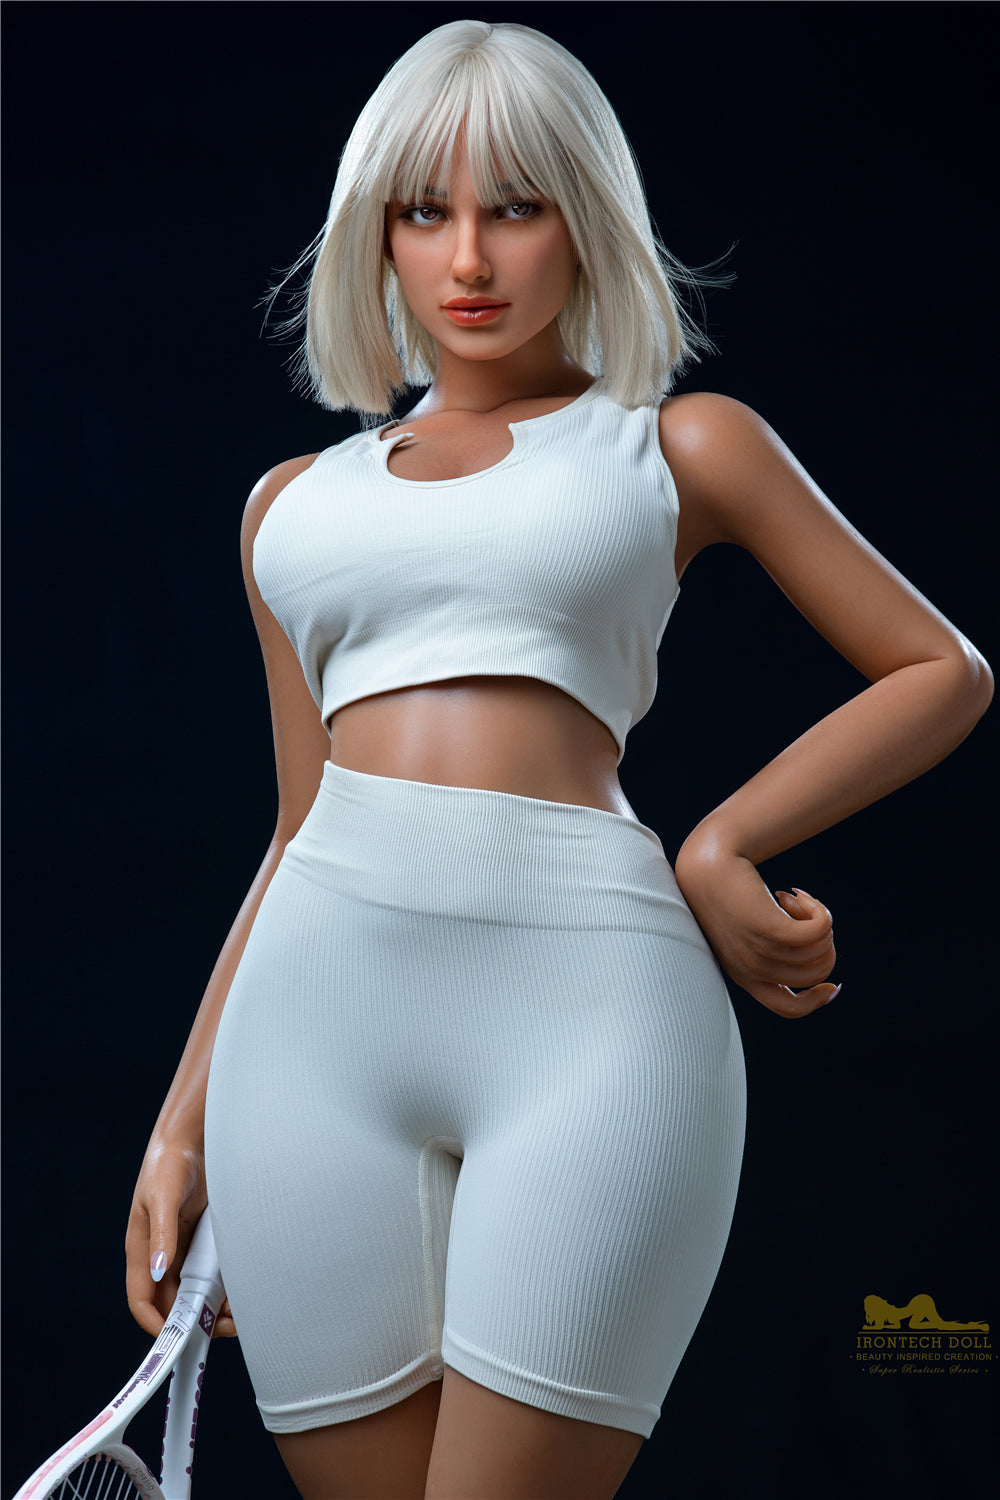 Irontechdoll Sama Plus 164cm S17 Full Silicone Love Doll Tanned Skin Realistic Adult Sex Doll